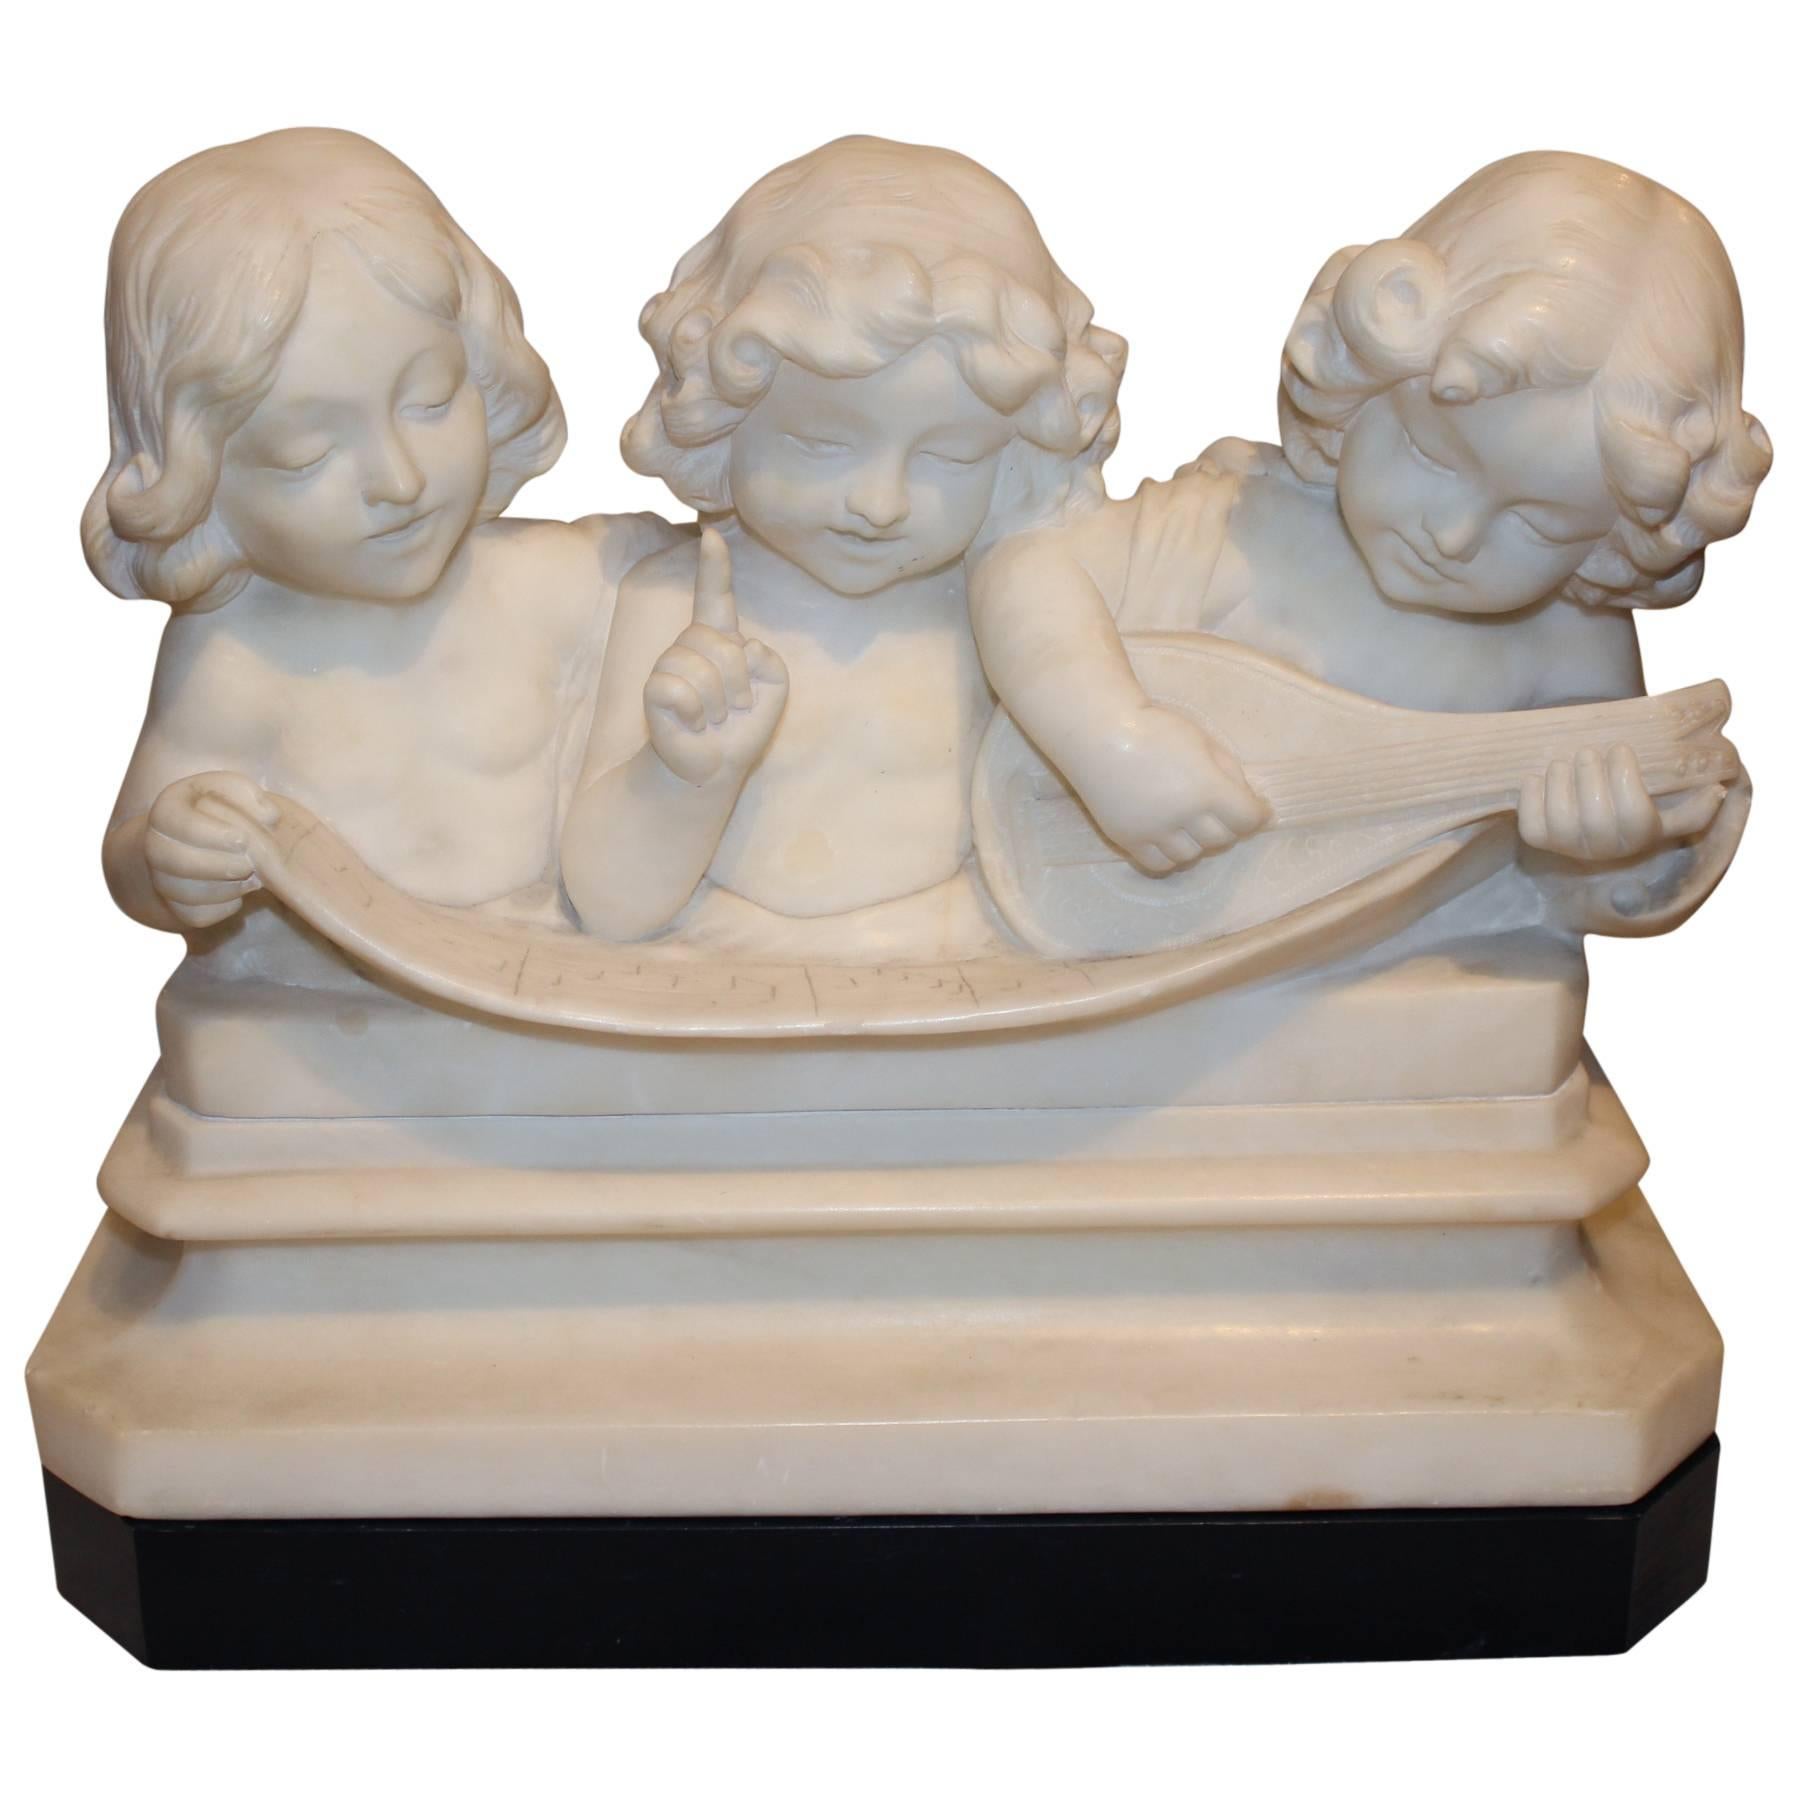 Adolfo Cipriani Carved Stone Musical Sculpture of Three Children Singing